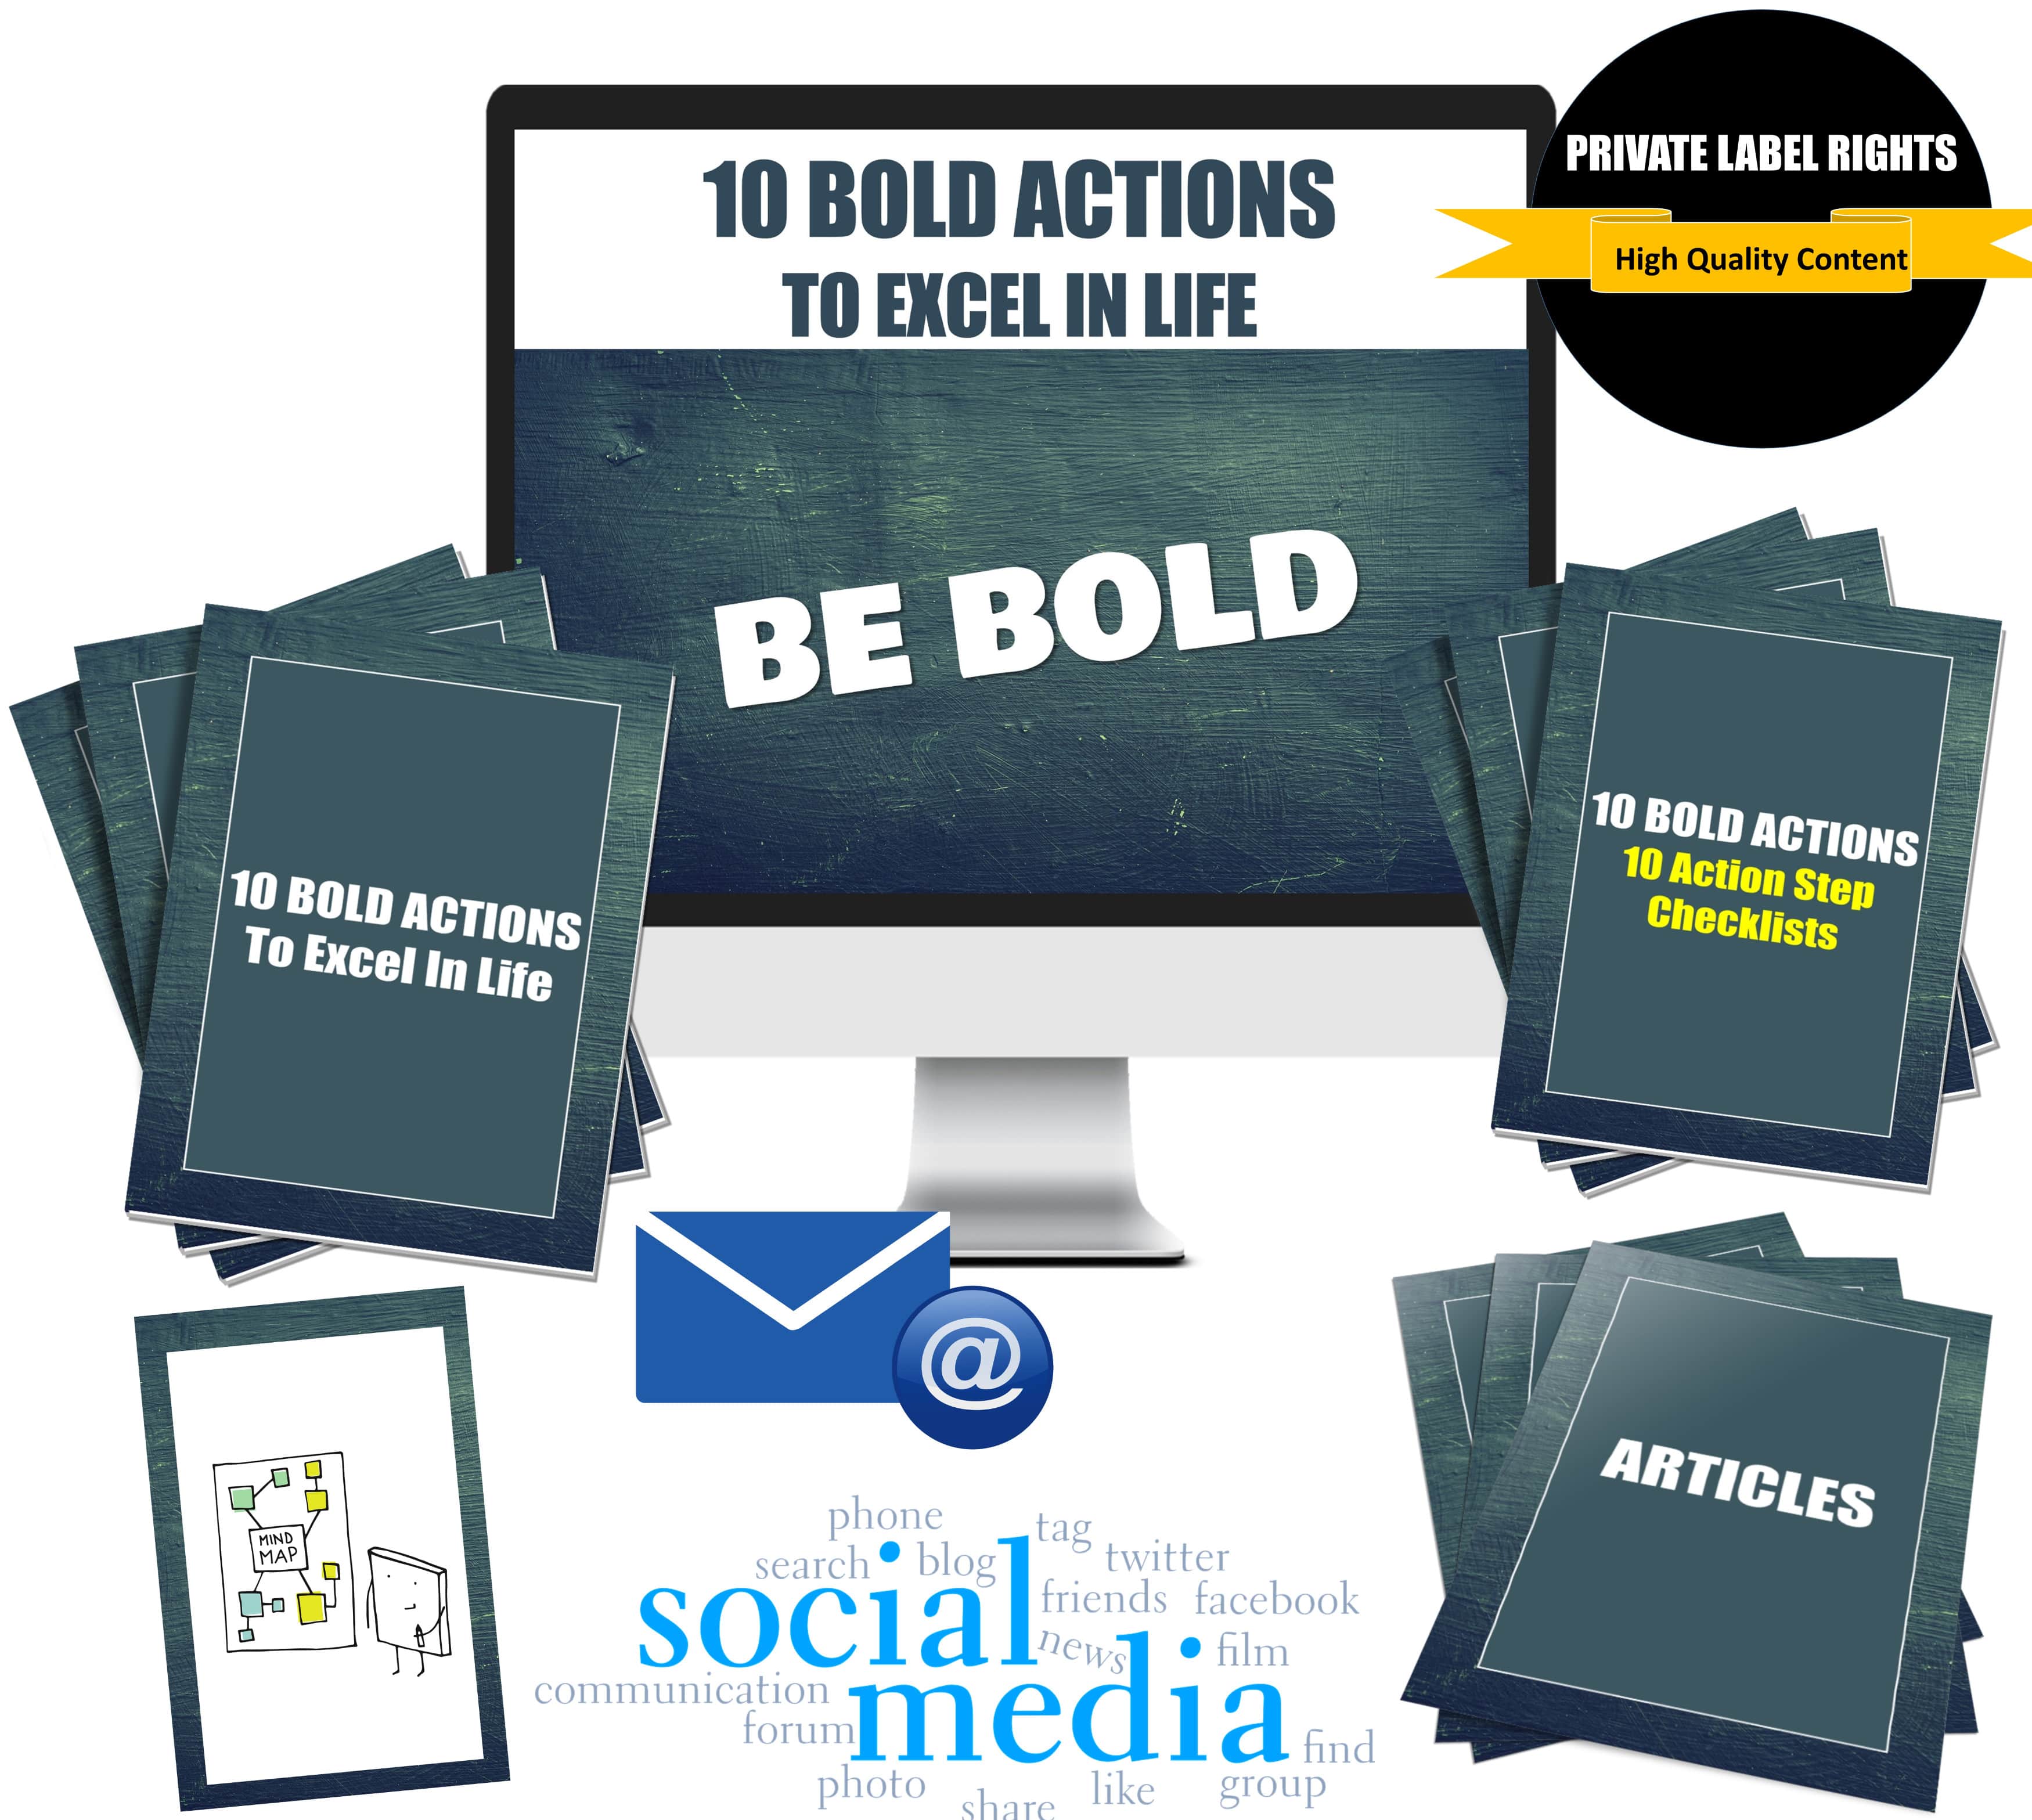 10 Bold Actions To Excel In Life Content With PLR Rights